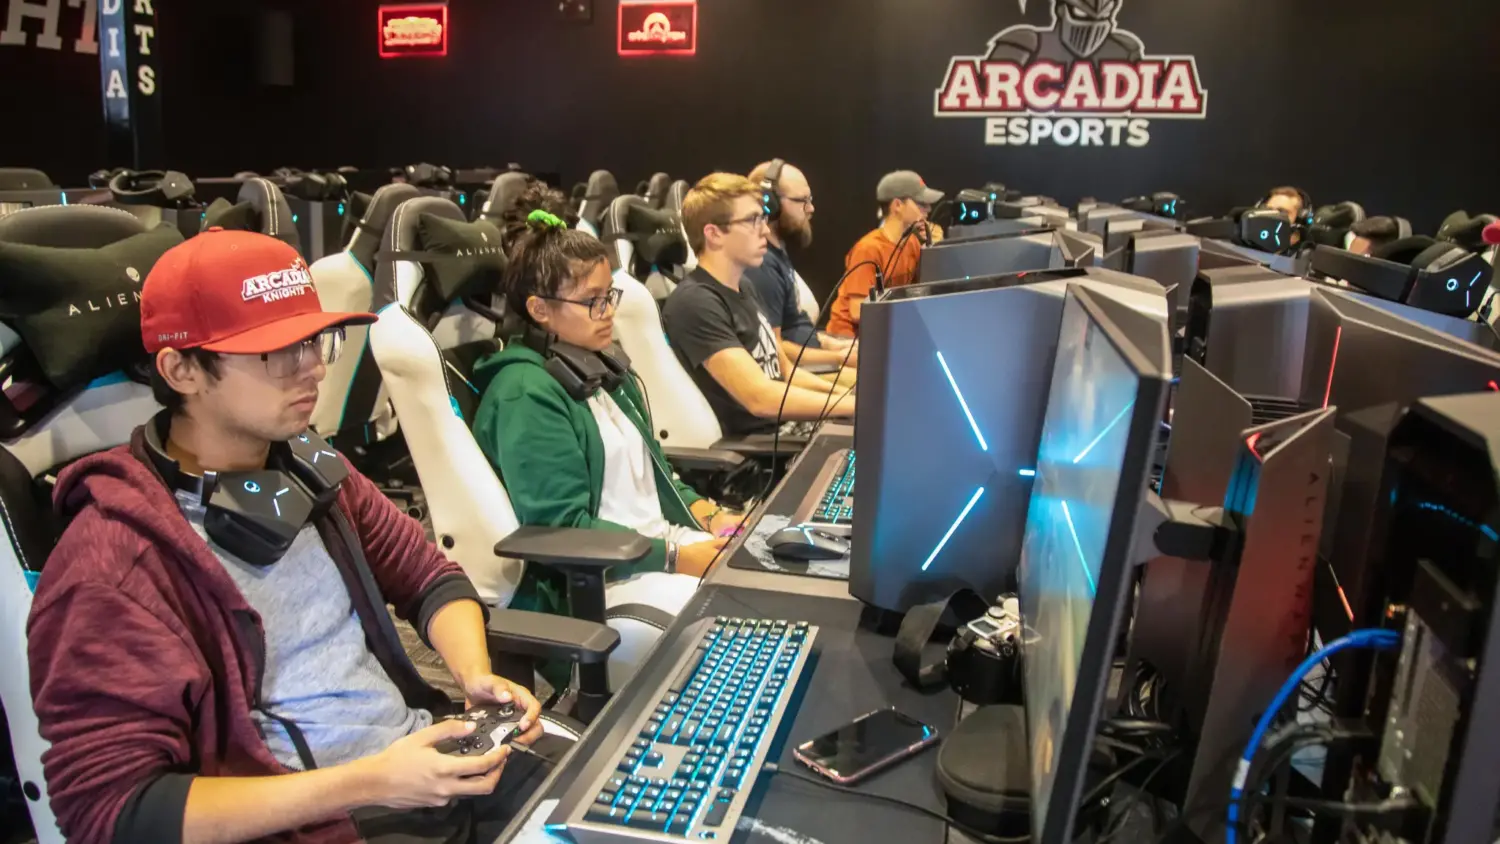 Arcadia University launches a co-educational esports program as a varsity sport in the fall 2019.